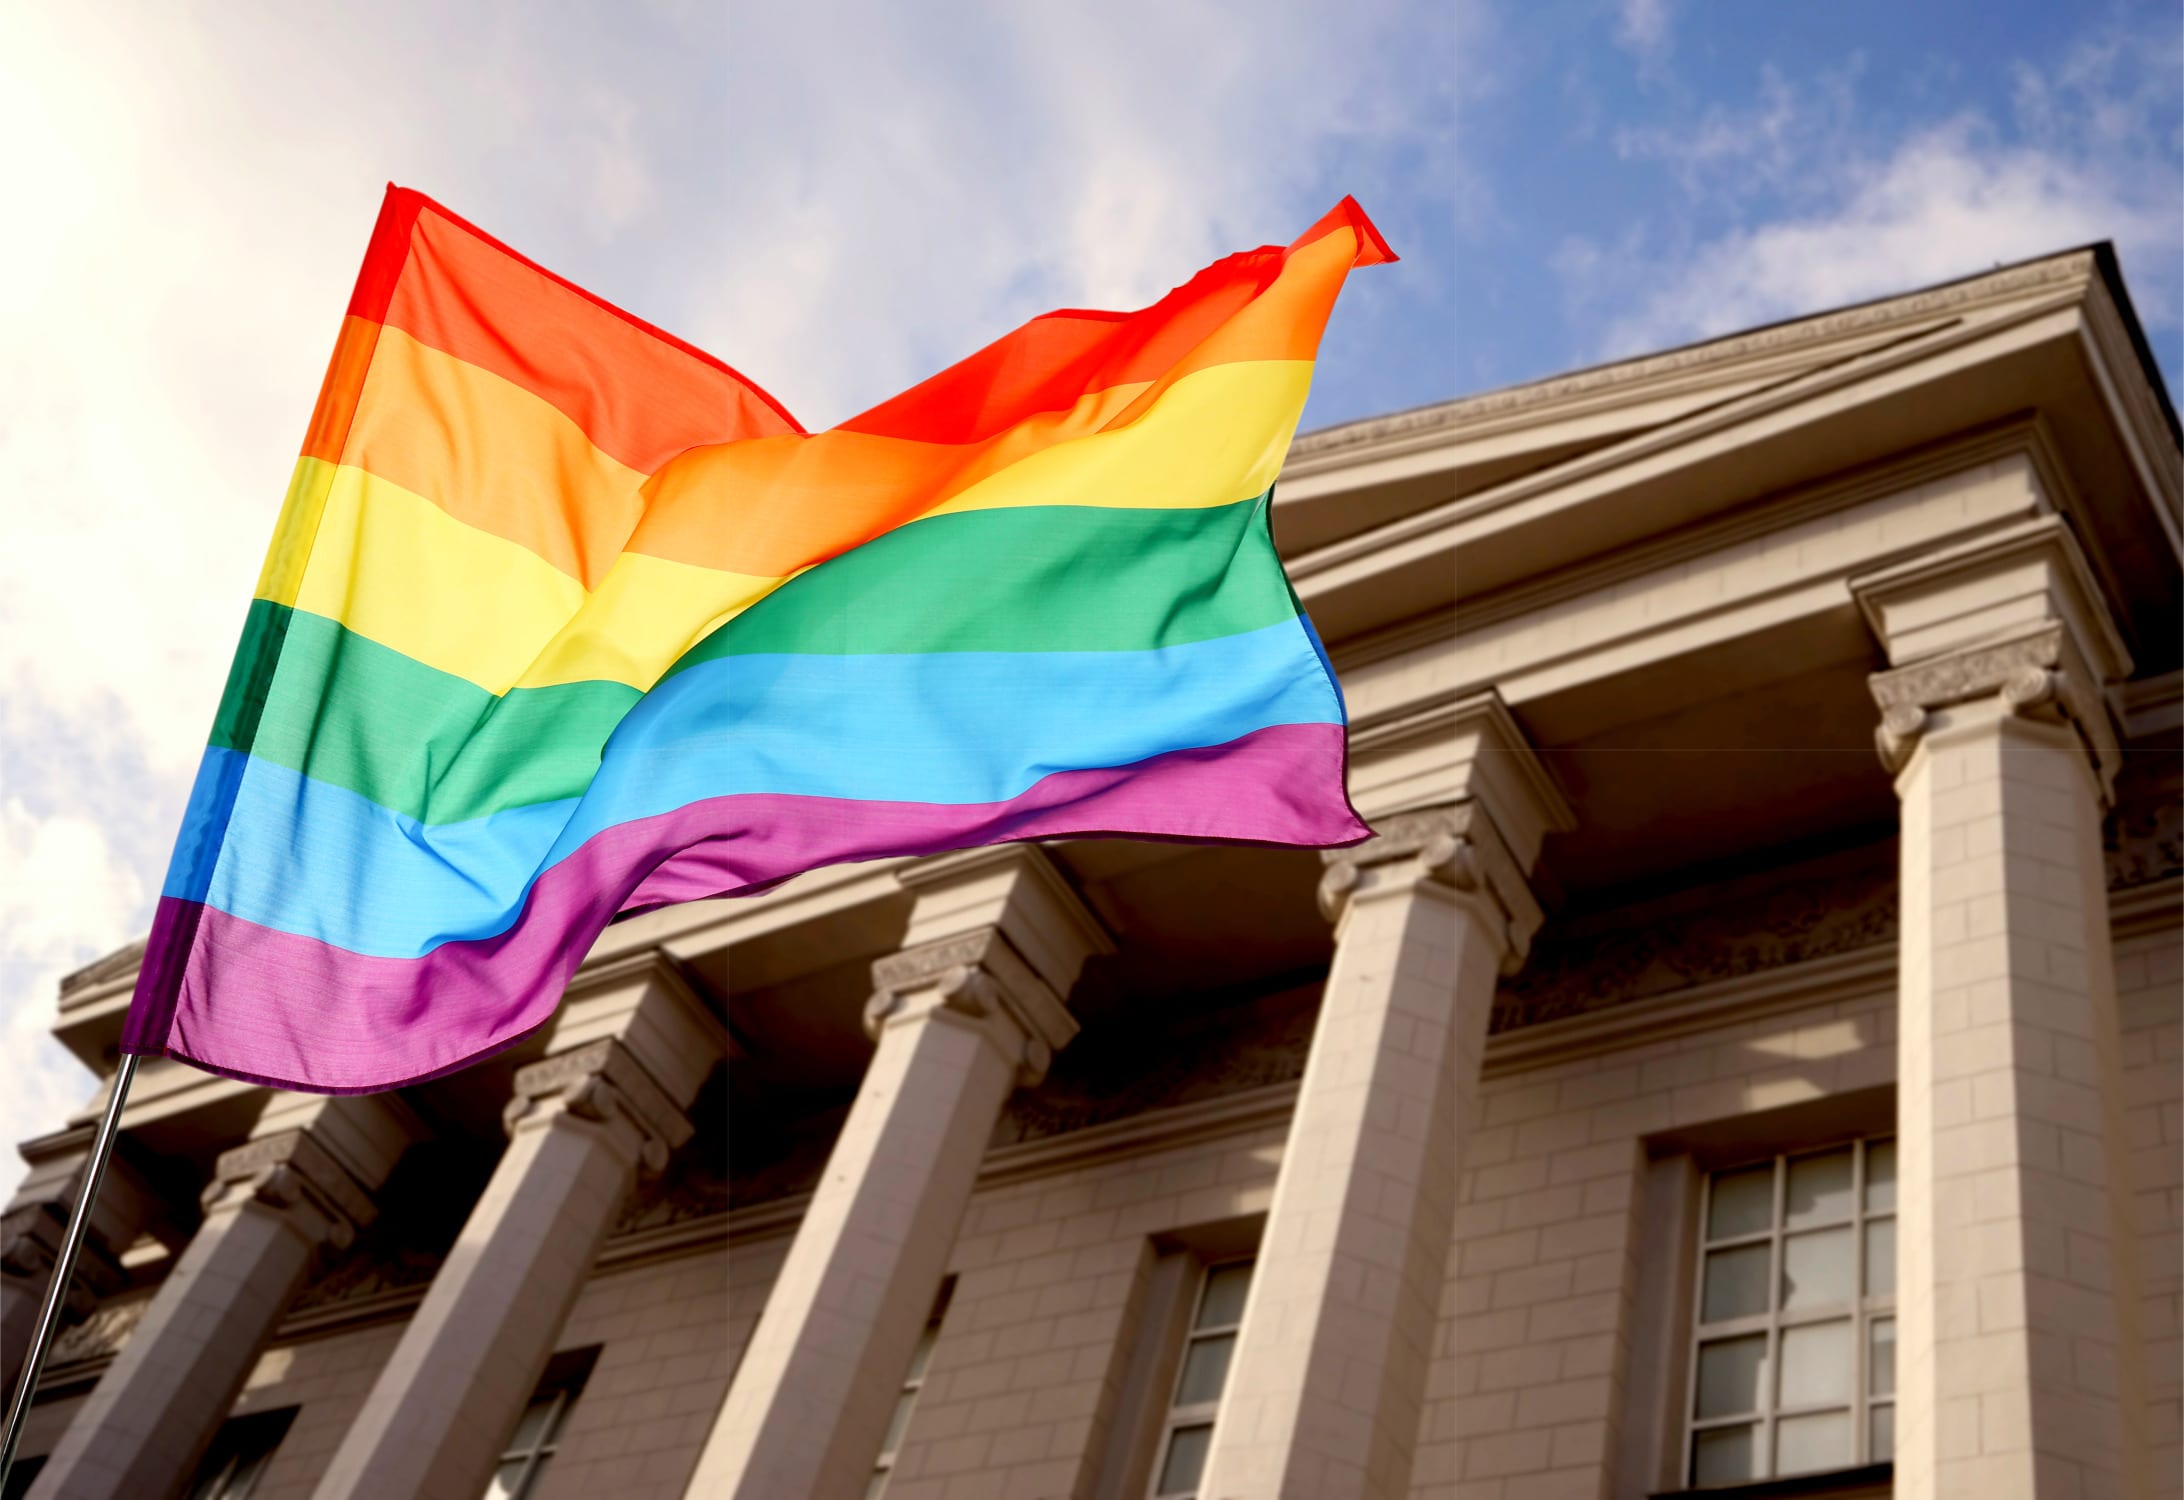 What Now? 12 Things Companies Should Do To Protect LGBTQ+ Employees